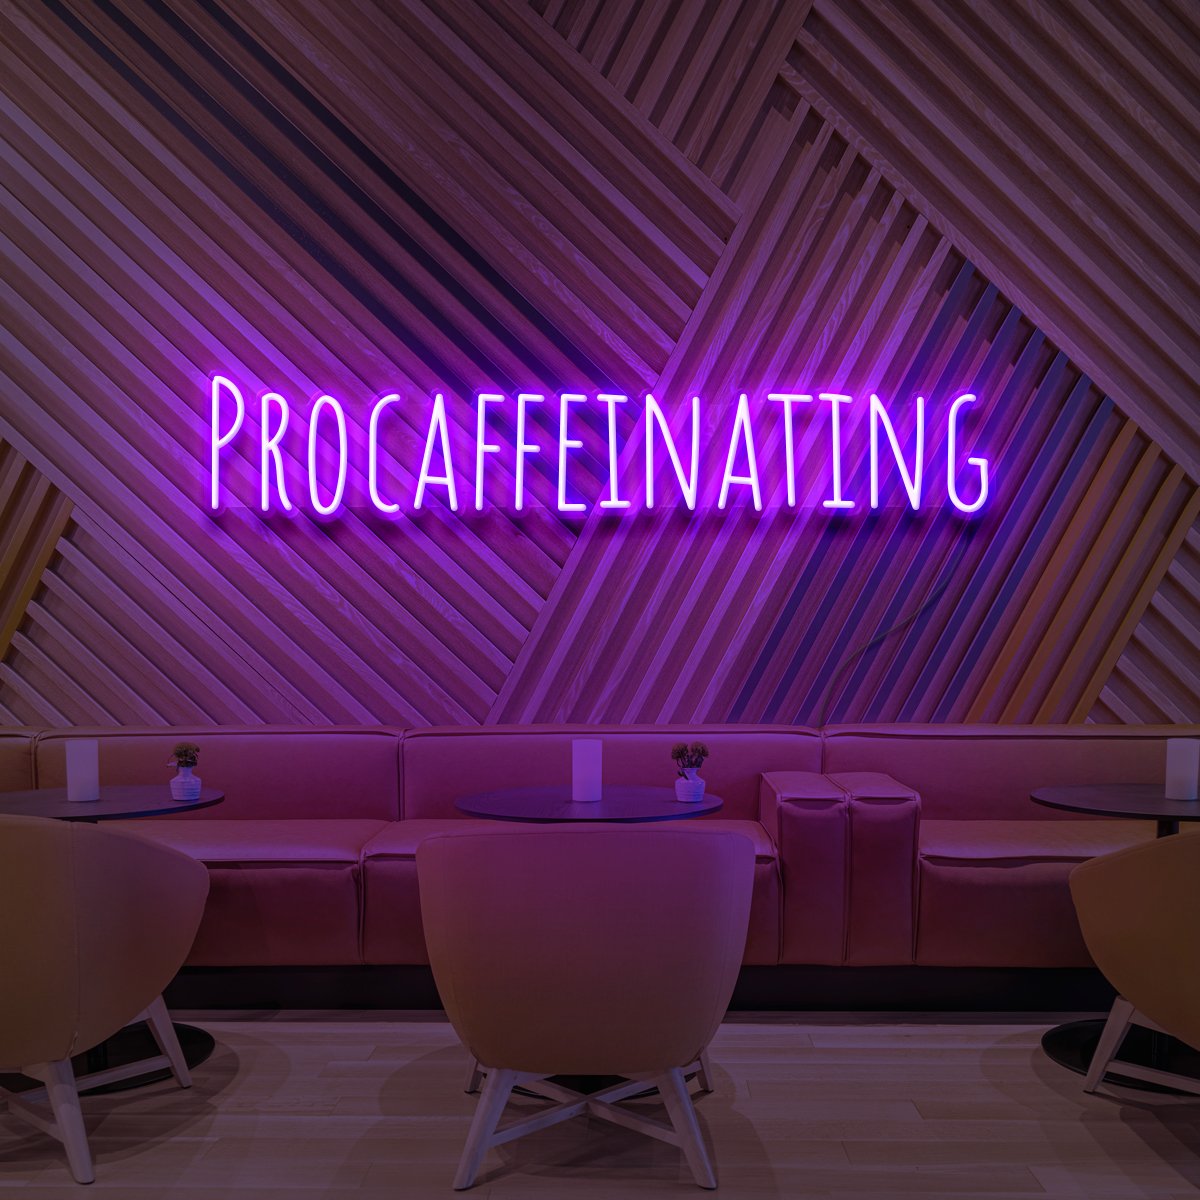 "Procaffeinating" Neon Sign for Cafés 60cm (2ft) / Purple / LED Neon by Neon Icons